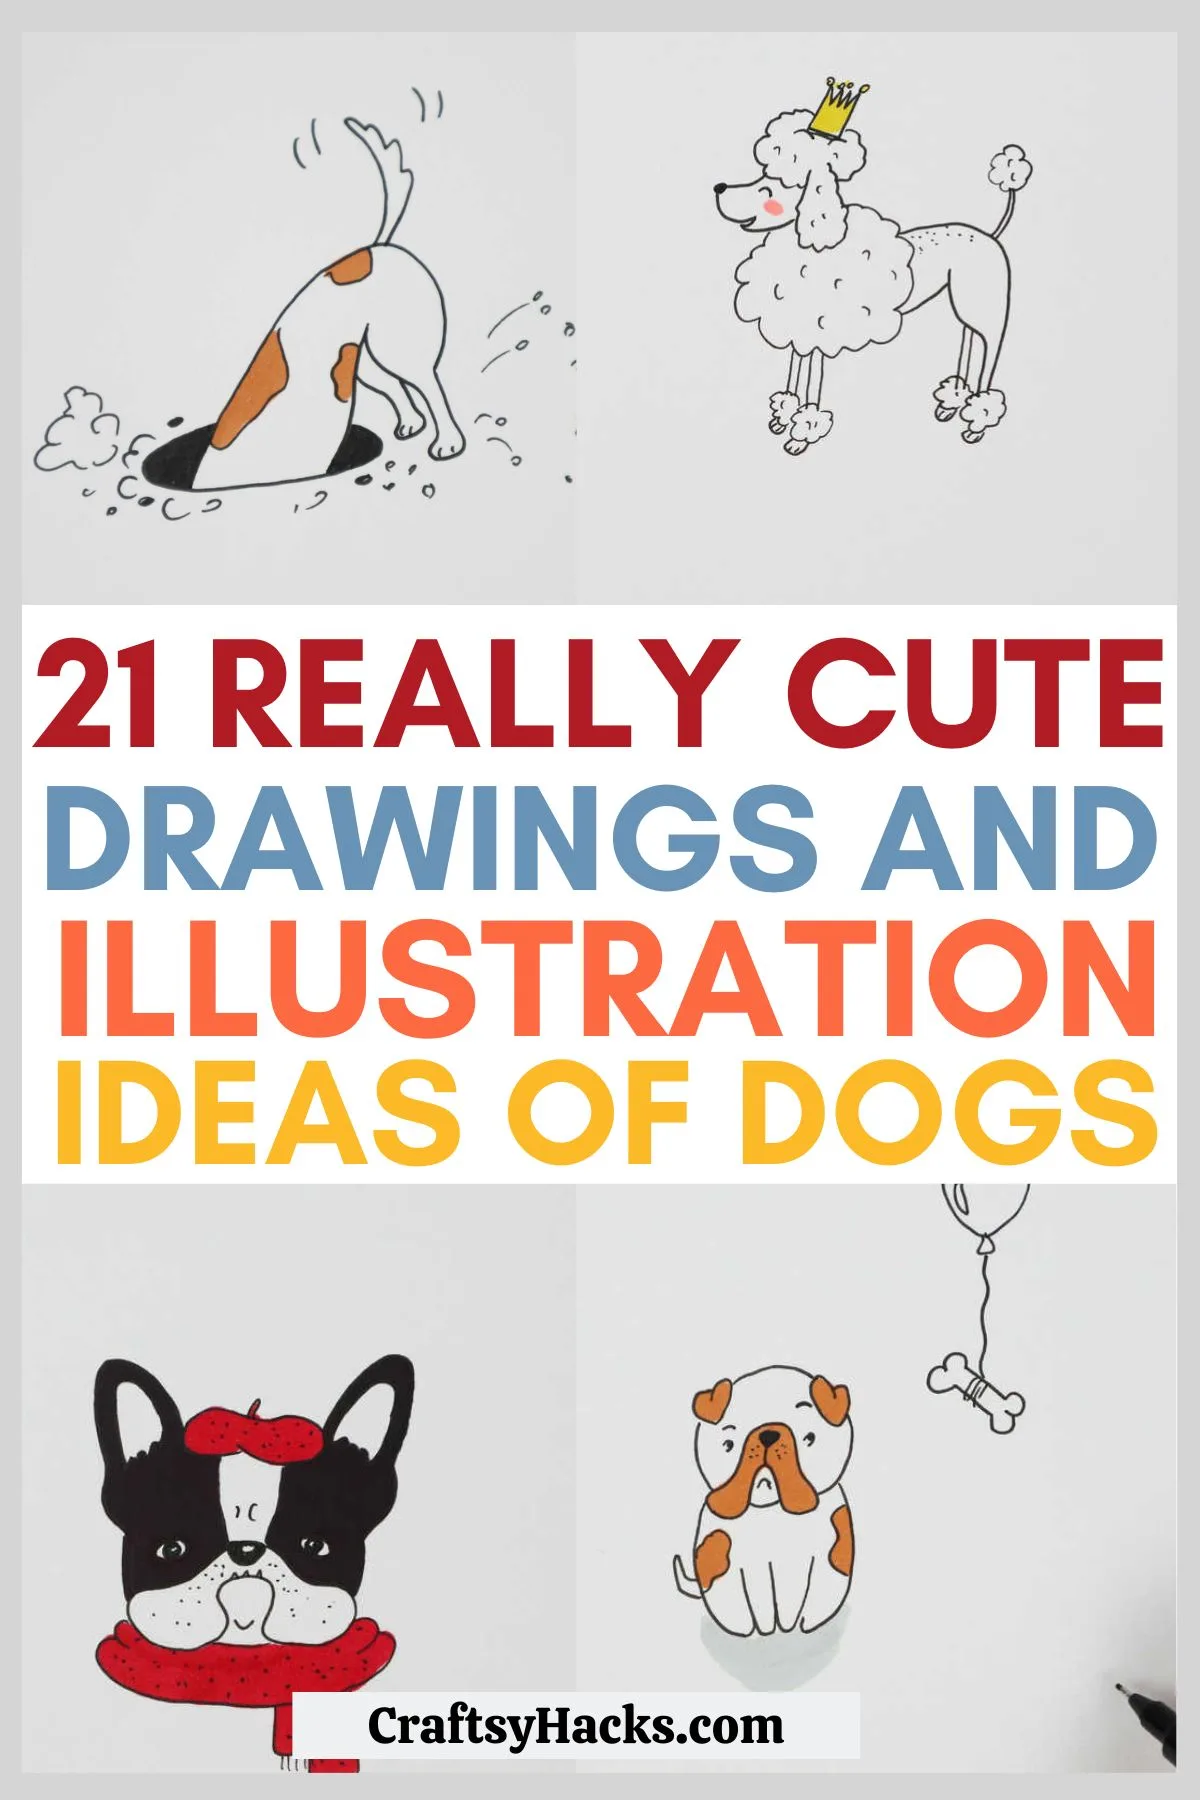 How to Draw a Dog Realistic e9w